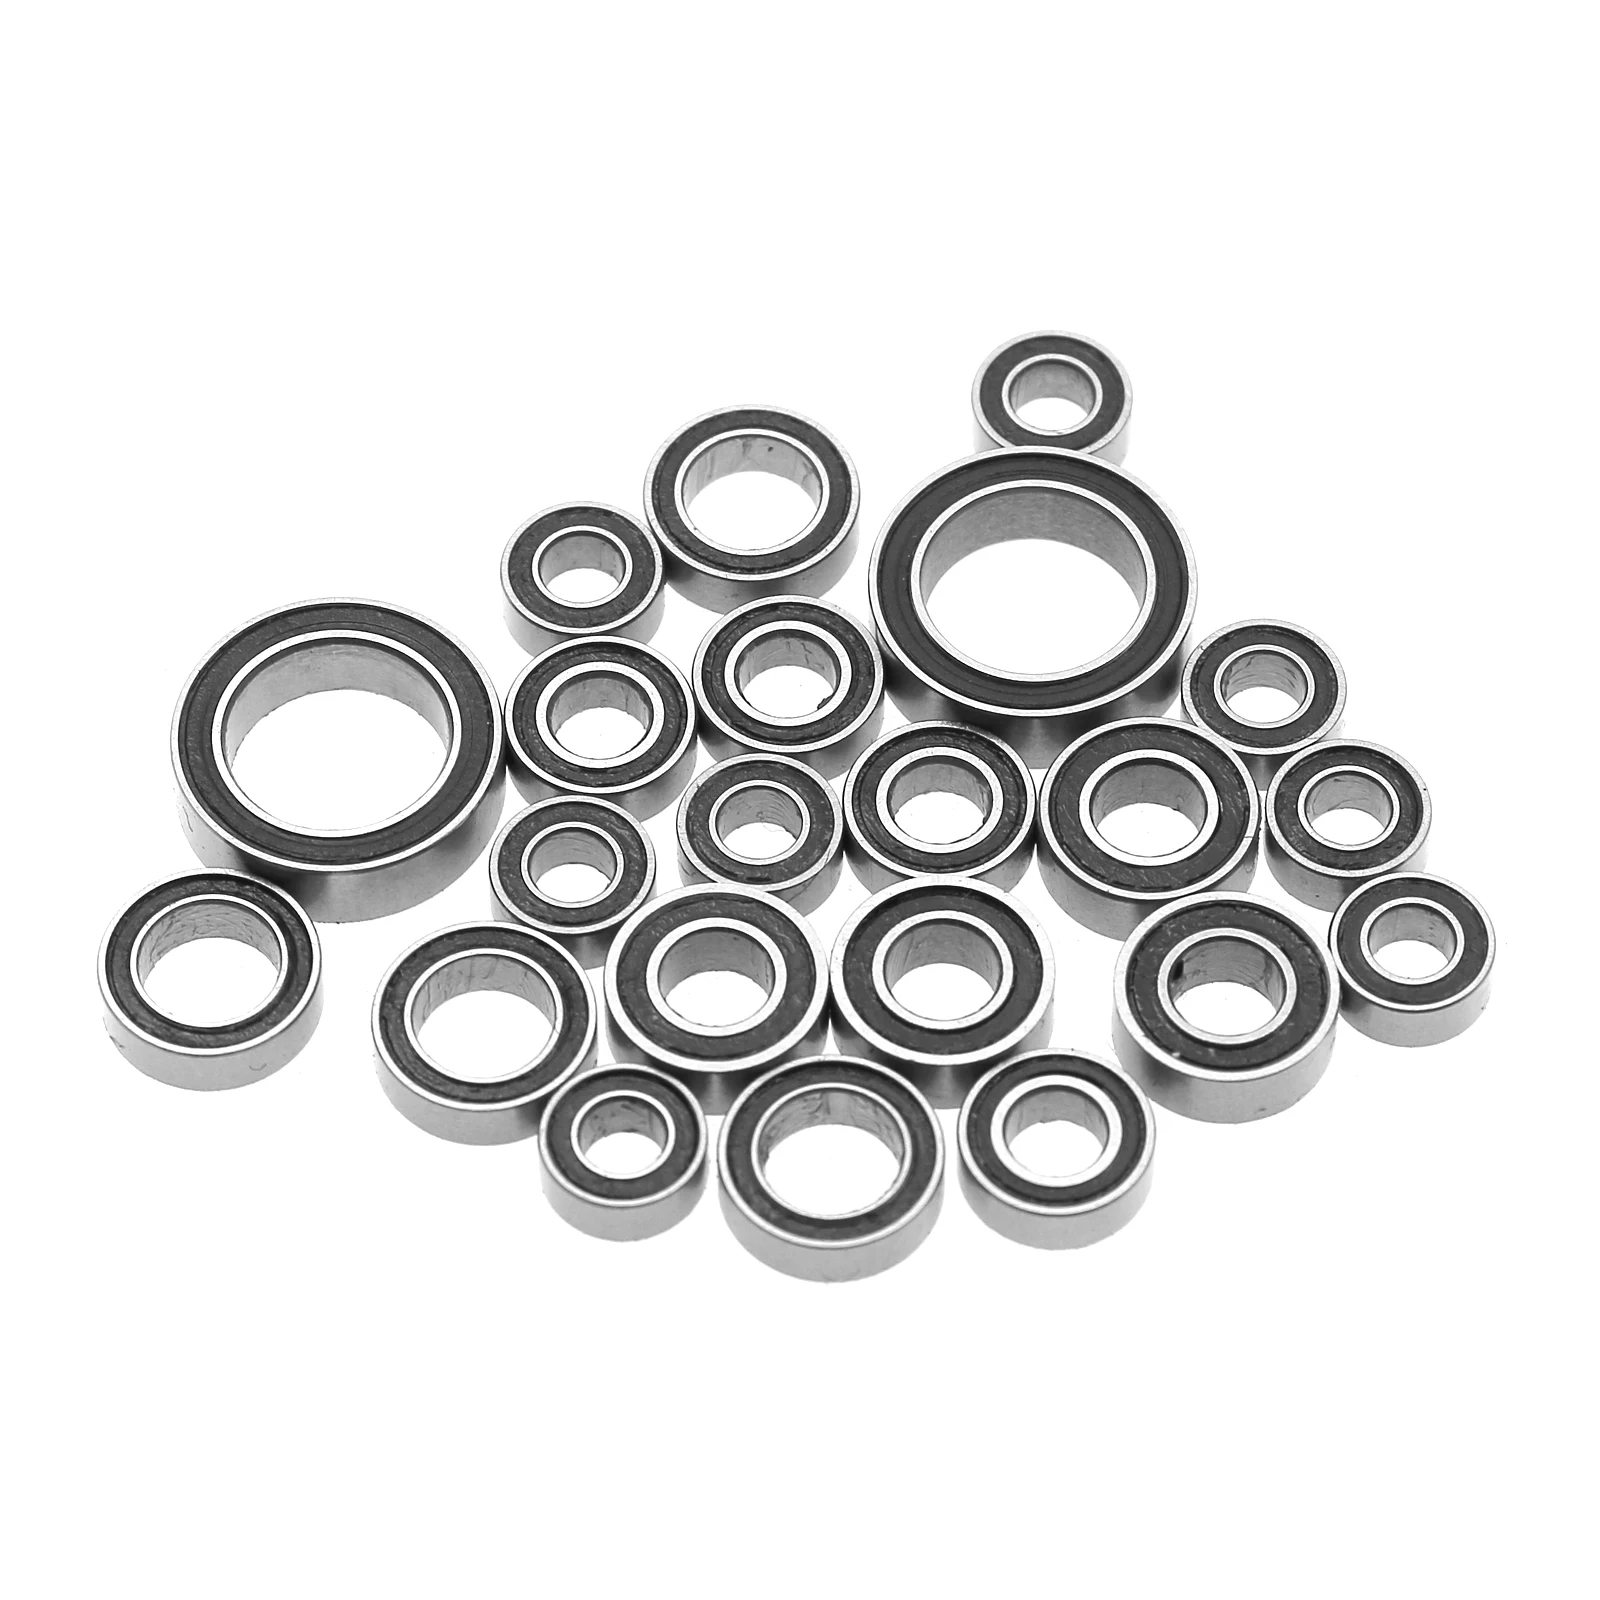 

22pcs Steel Sealed Bearing Kit # 9745 for Traxxas TRX4M TRX4-M 1/18 RC Crawler Car Upgrade Parts Accessories